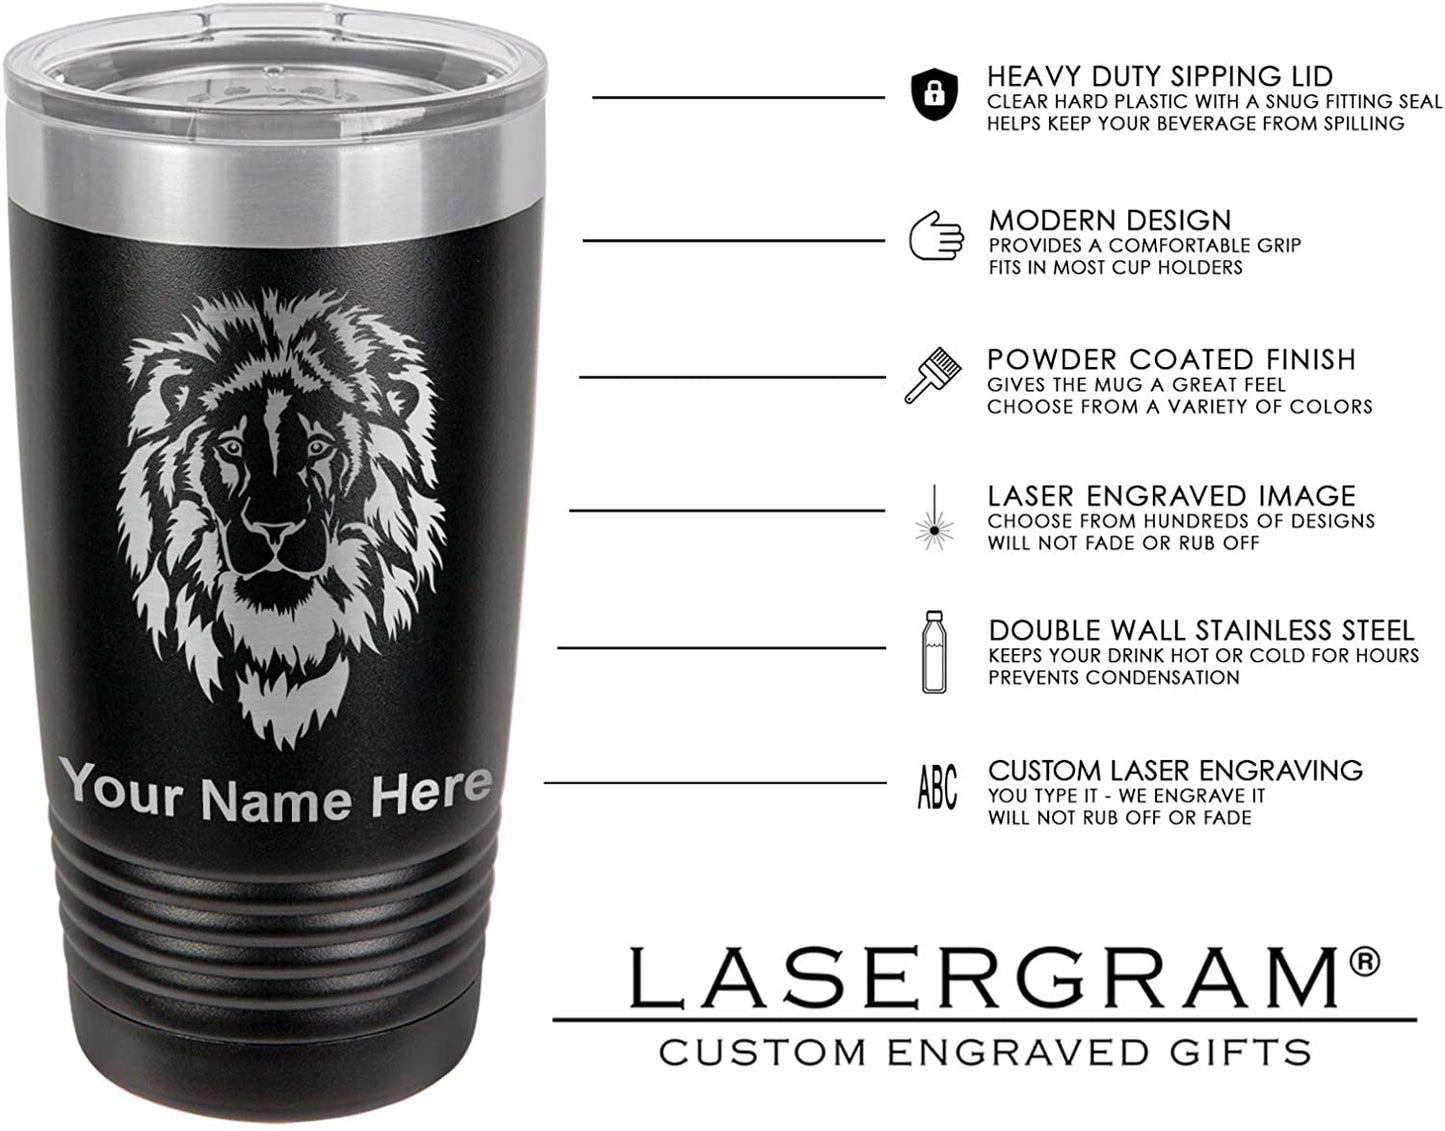 20oz Vacuum Insulated Tumbler Mug, Jolly Roger, Personalized Engraving Included